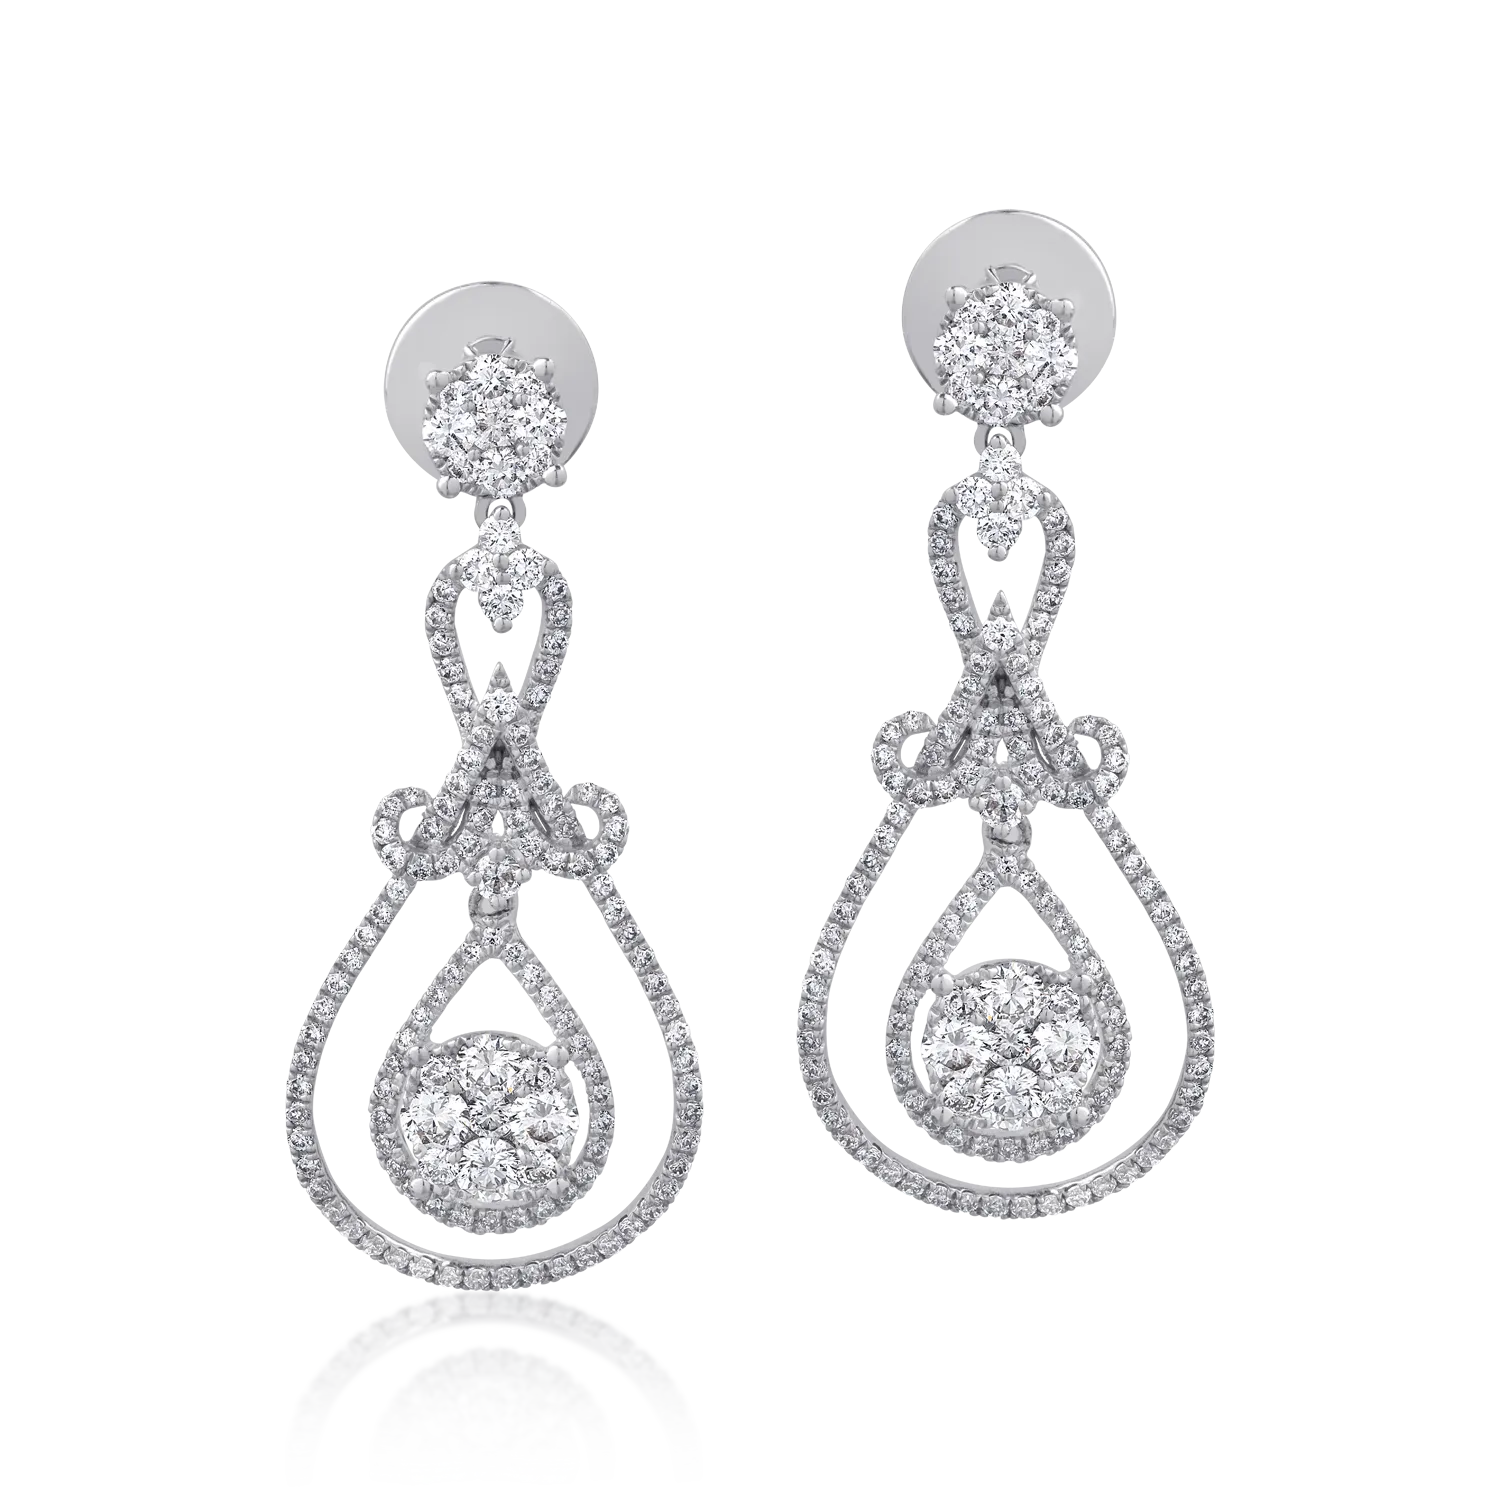 18K white gold earrings with 2.08ct diamonds